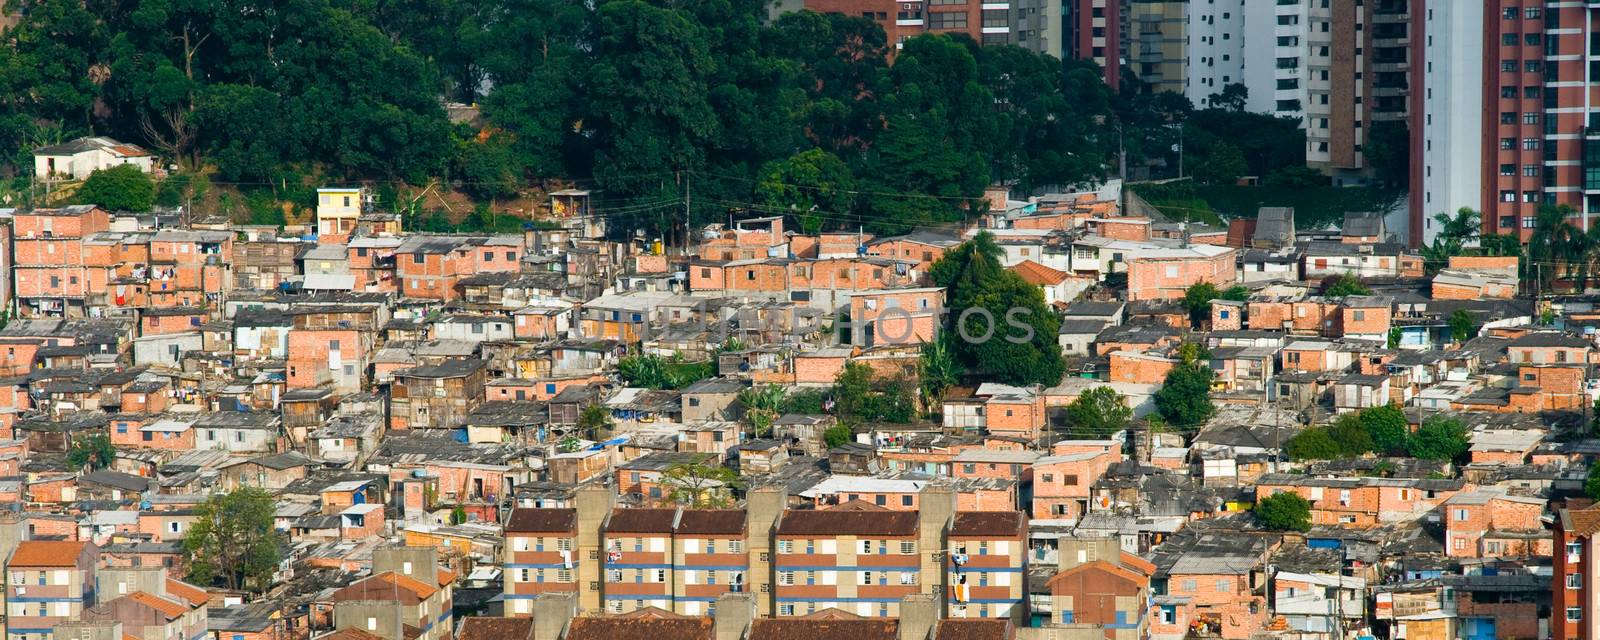 Aerial view of houses in a town, Morumbi, Sao Paulo, Brazil